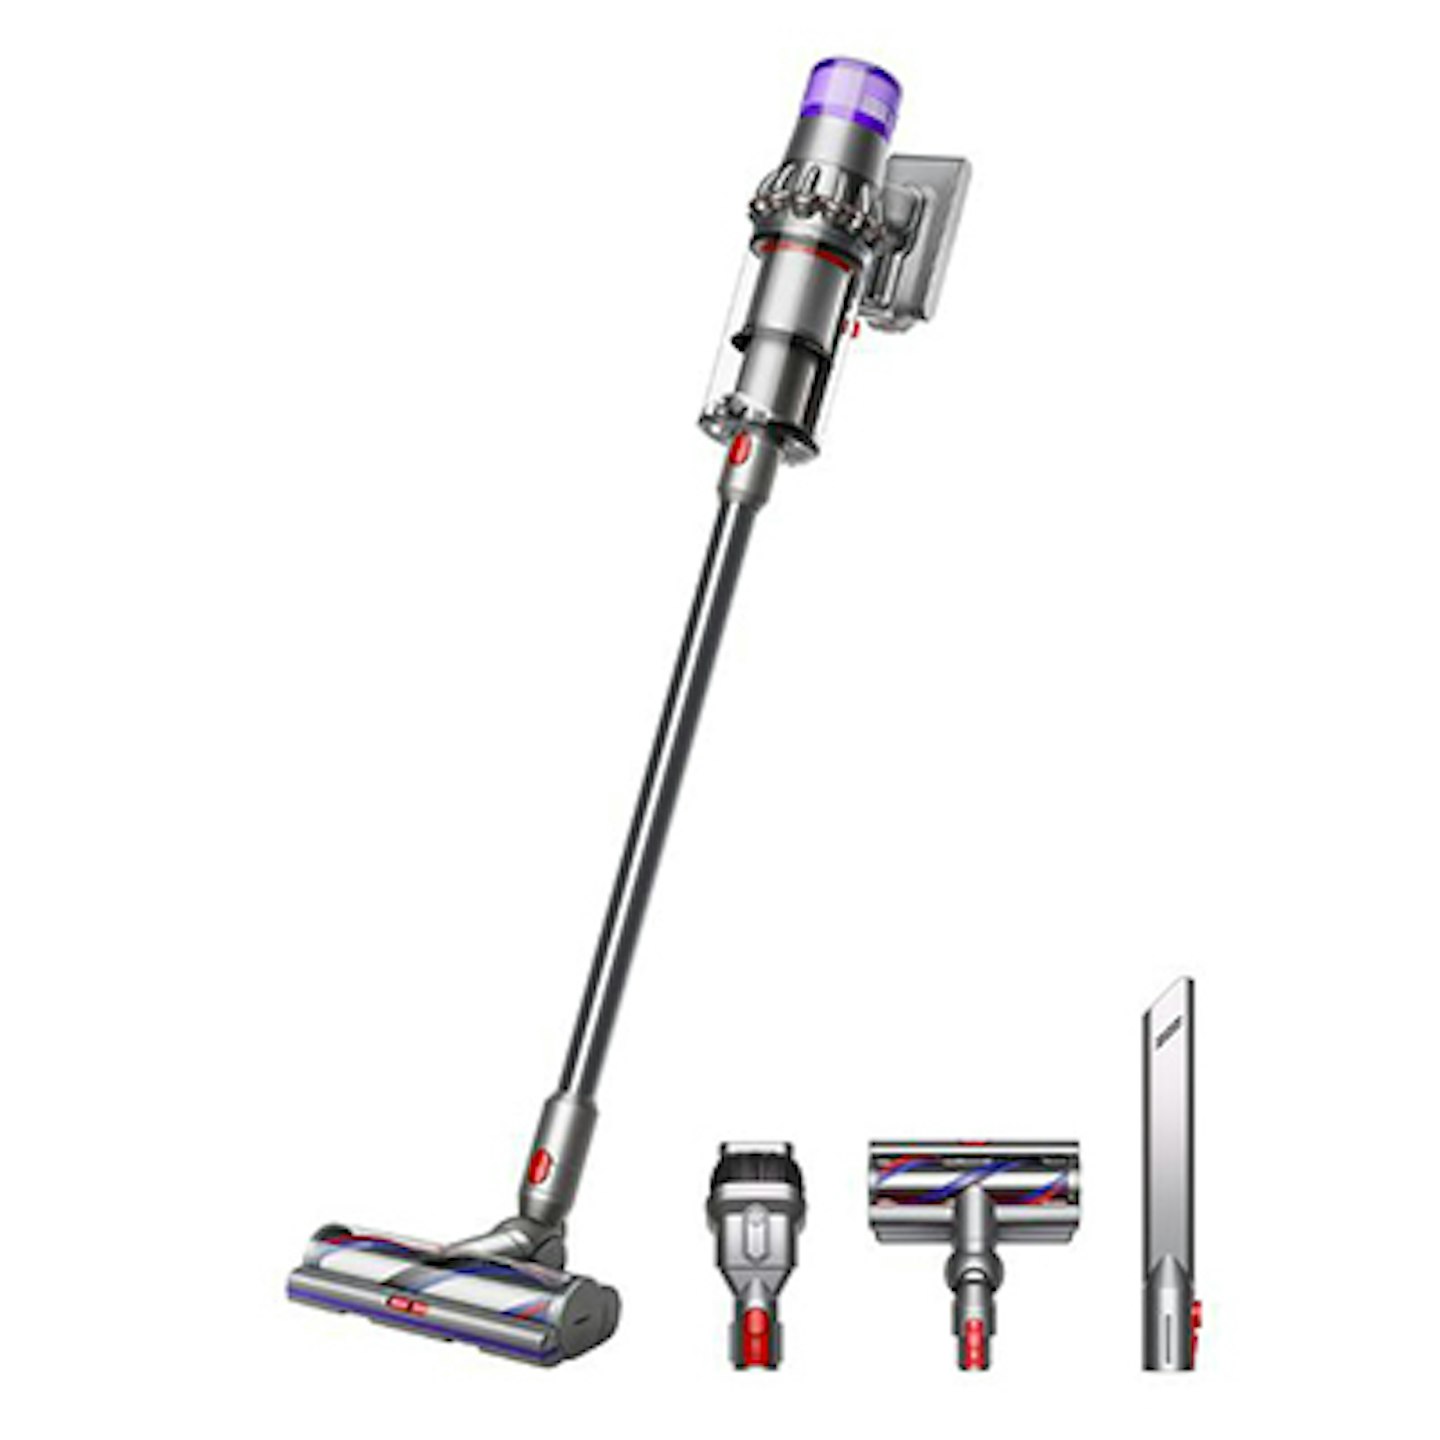 Tech talk: Cleaning is a breeze with Proscenic's nifty new cordless vacuum  cleaner